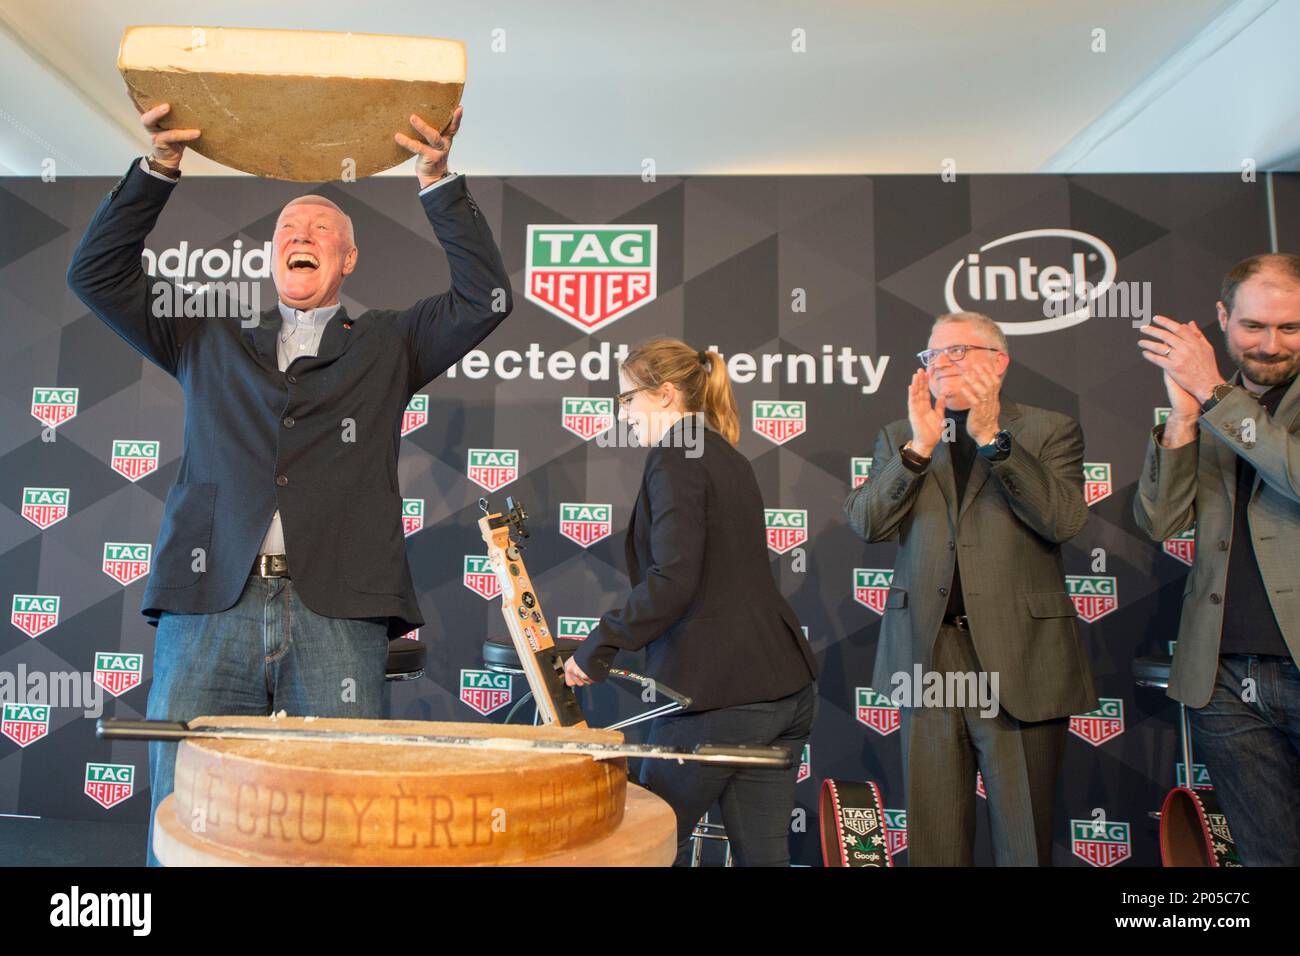 The CEO of TAG Heuer, Jean-Claude Biver, left, presents a cheese at the  press conference of the Watch company TAG Heuer in Brunnen, Switzerland  Tuesday, March 14, 2017. (Urs Flueeler/Keystone via AP